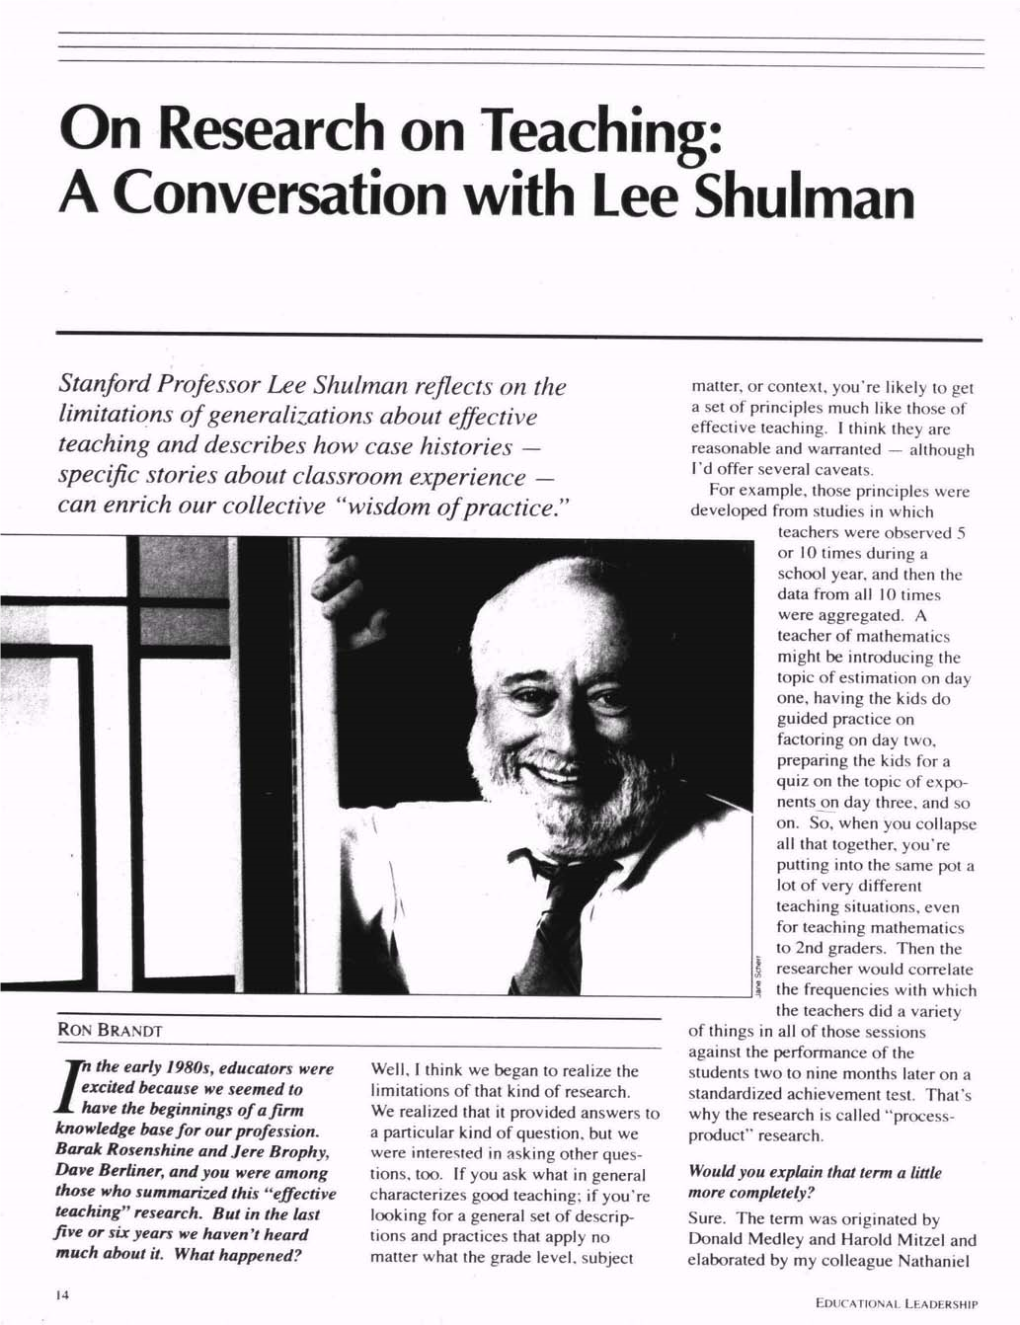 On Research on Teaching: a Conversation with Lee Shulman